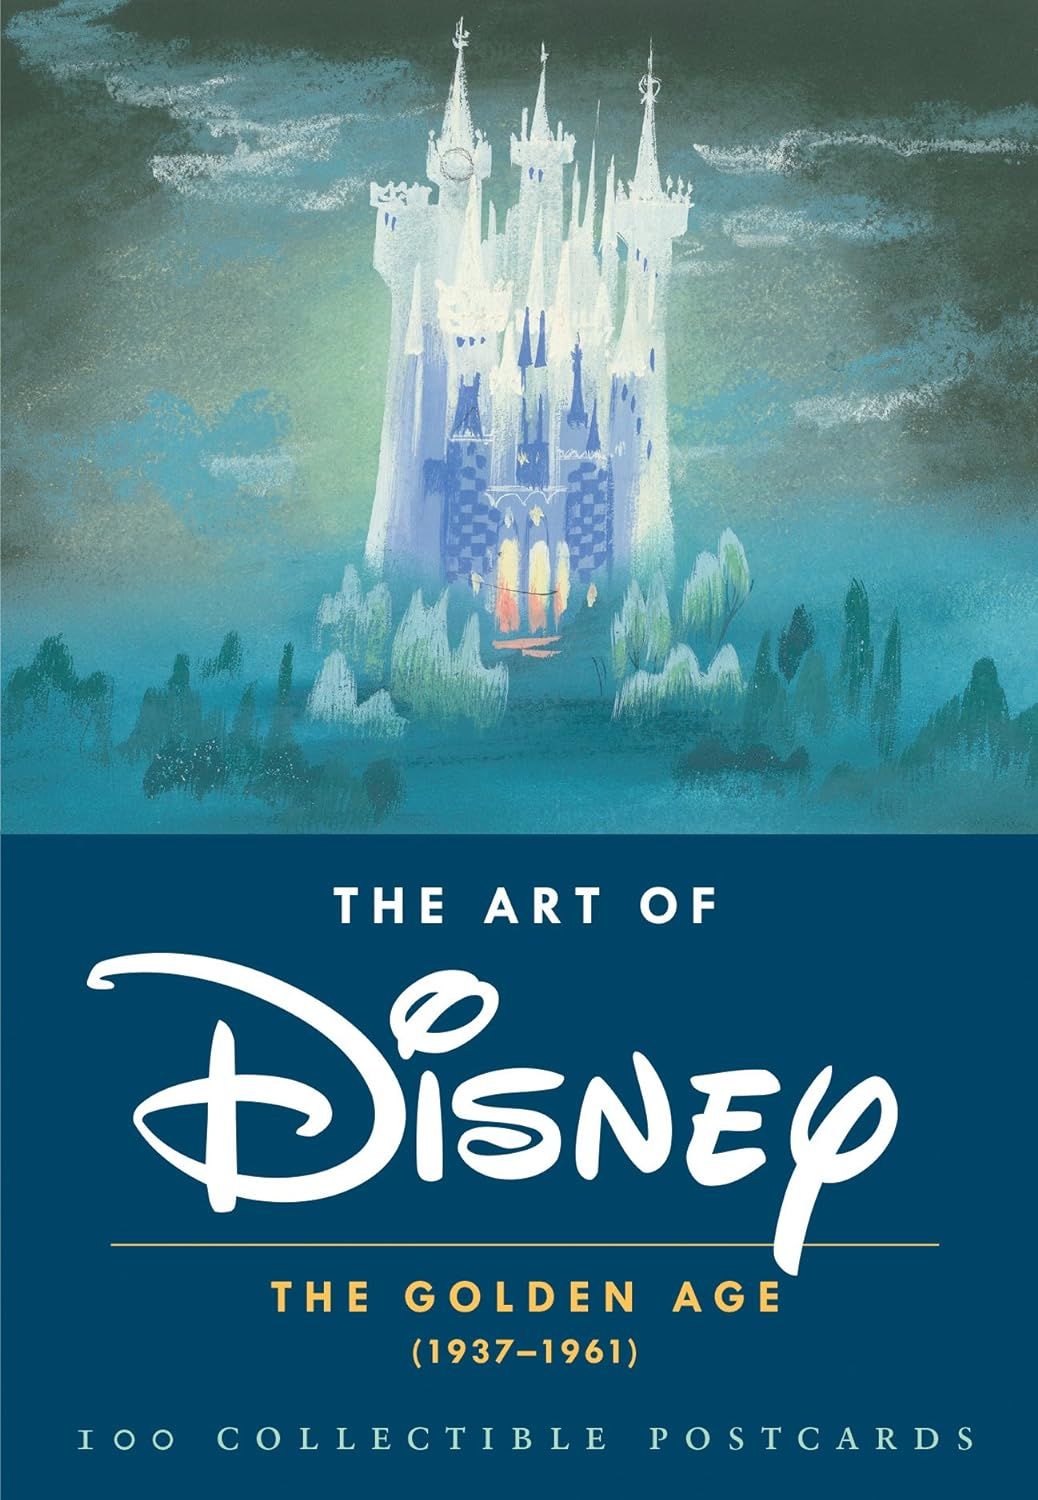 The Art of Disney: The Golden Age (1937-1961): 100 Collectible Postcards